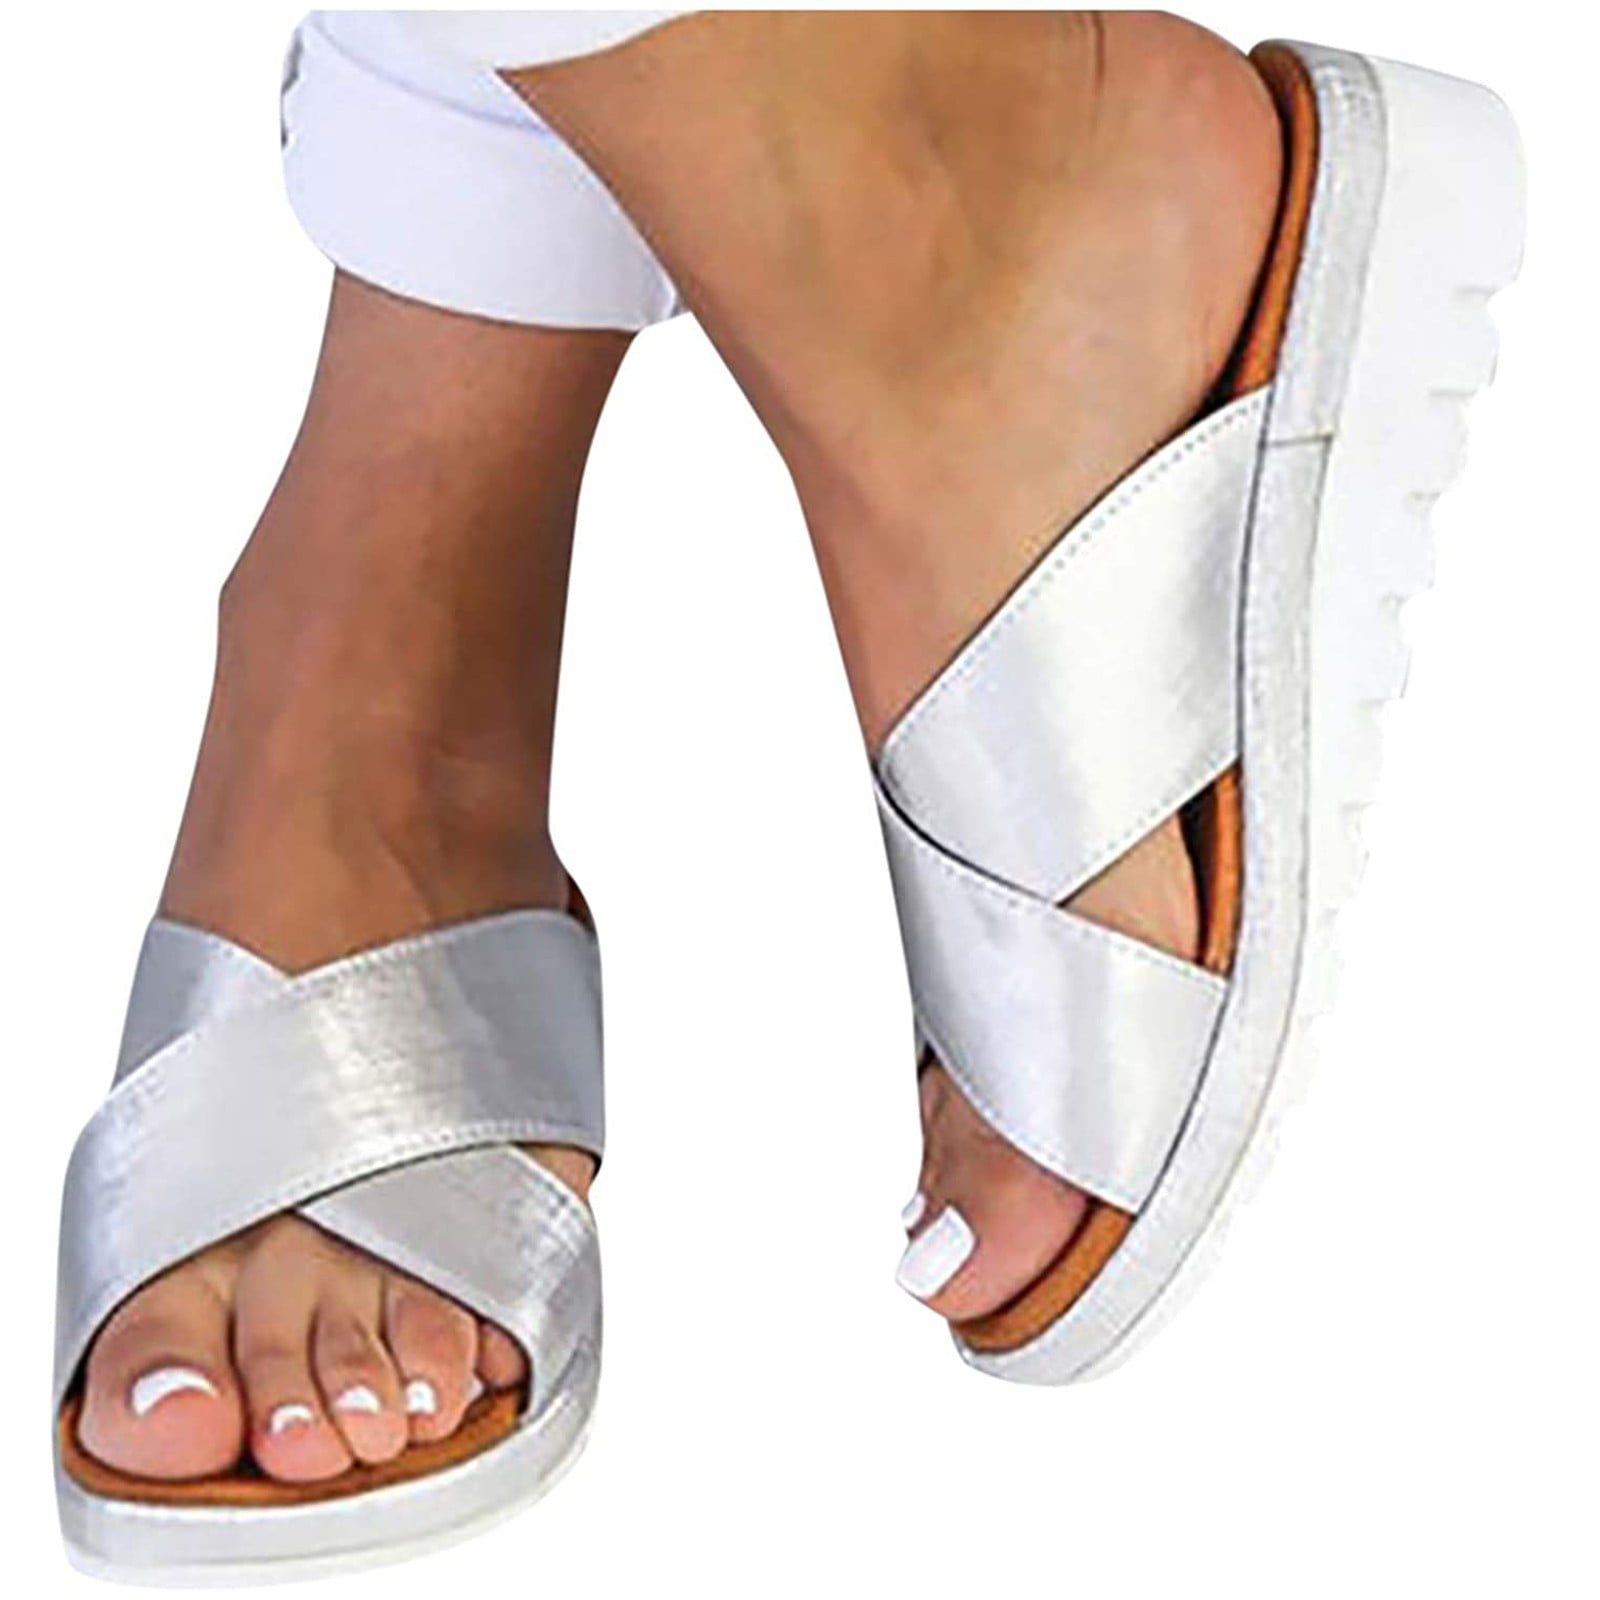 Details about   Womens Open toe High Block Heel Pull on Fashion Slippers Shoes Summer Sandals SZ 